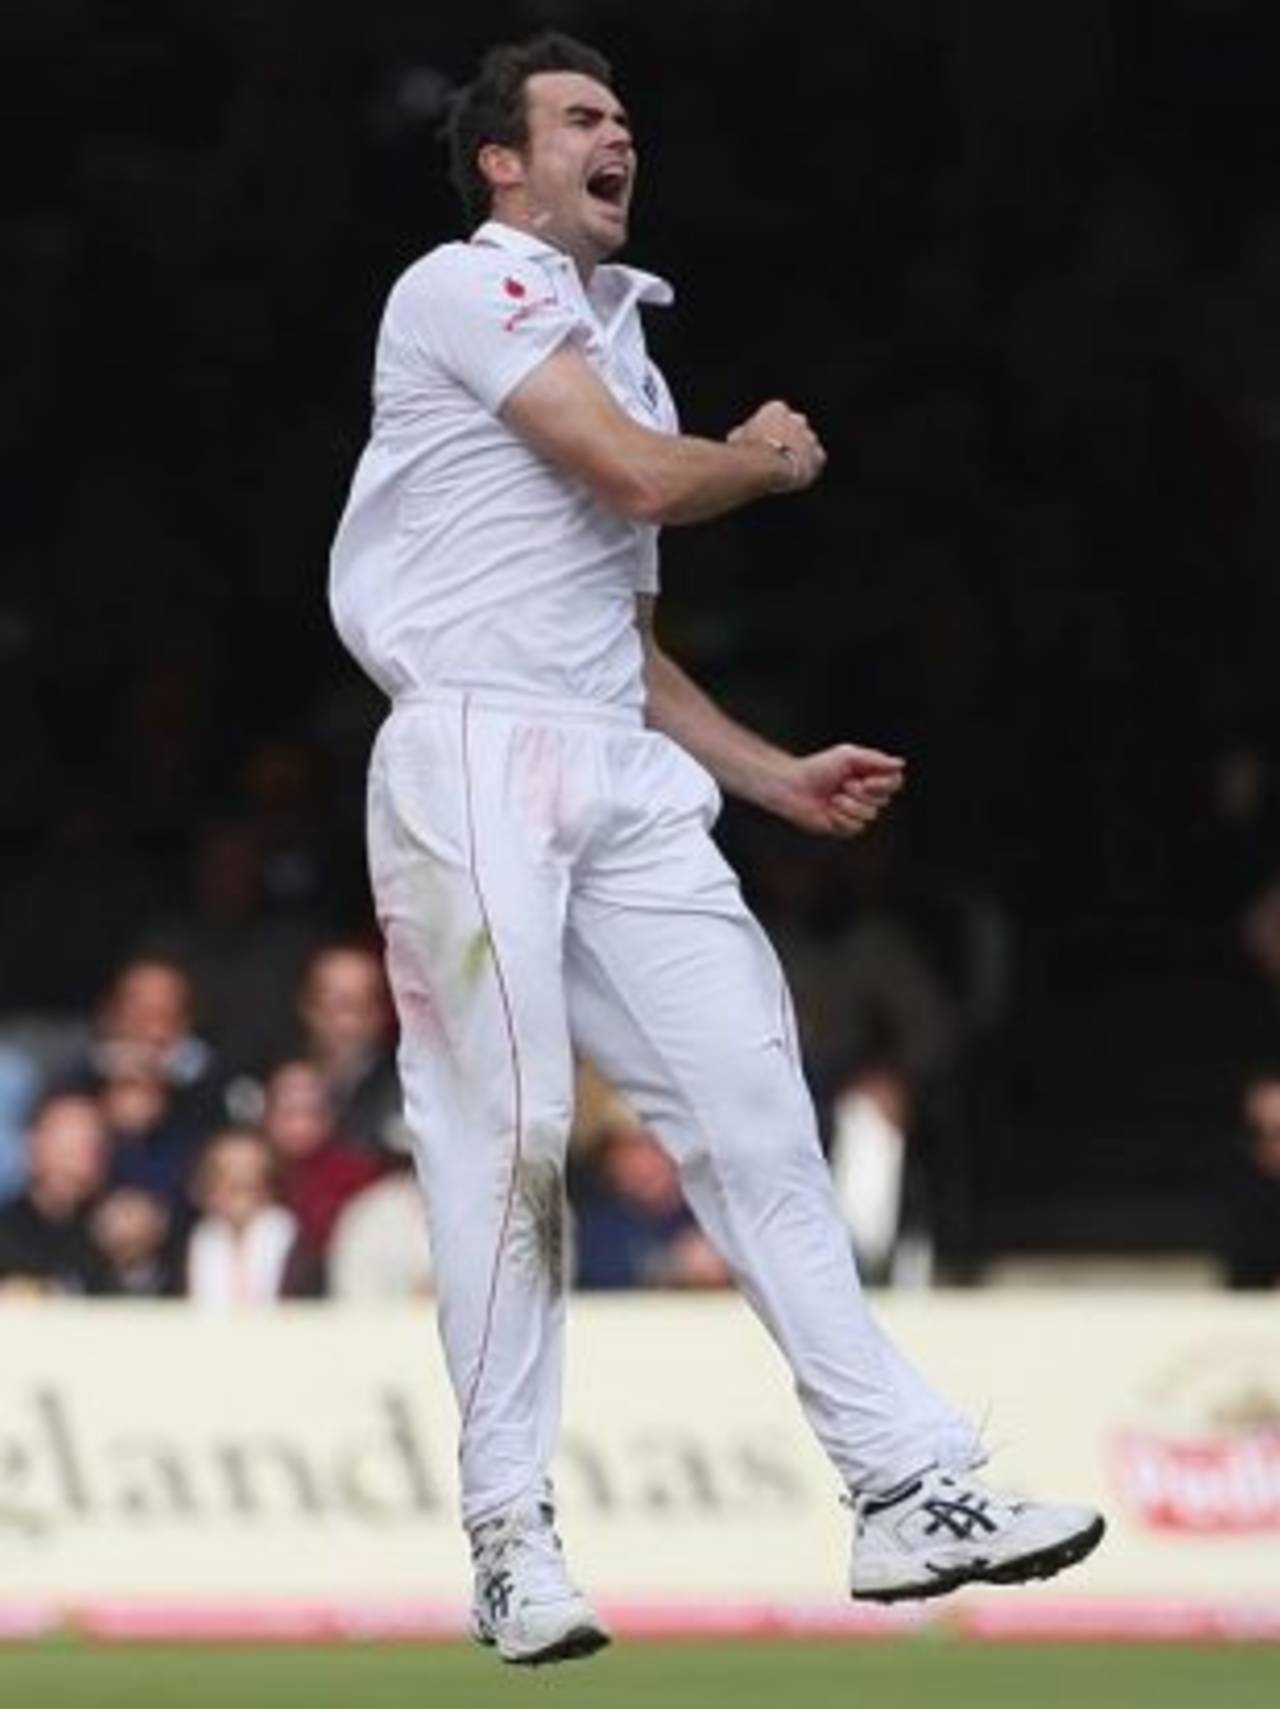 James Anderson celebrates Michael Clarke's wicket, England v Australia, 2nd Test, Lord's, 2nd day, July 17, 2009